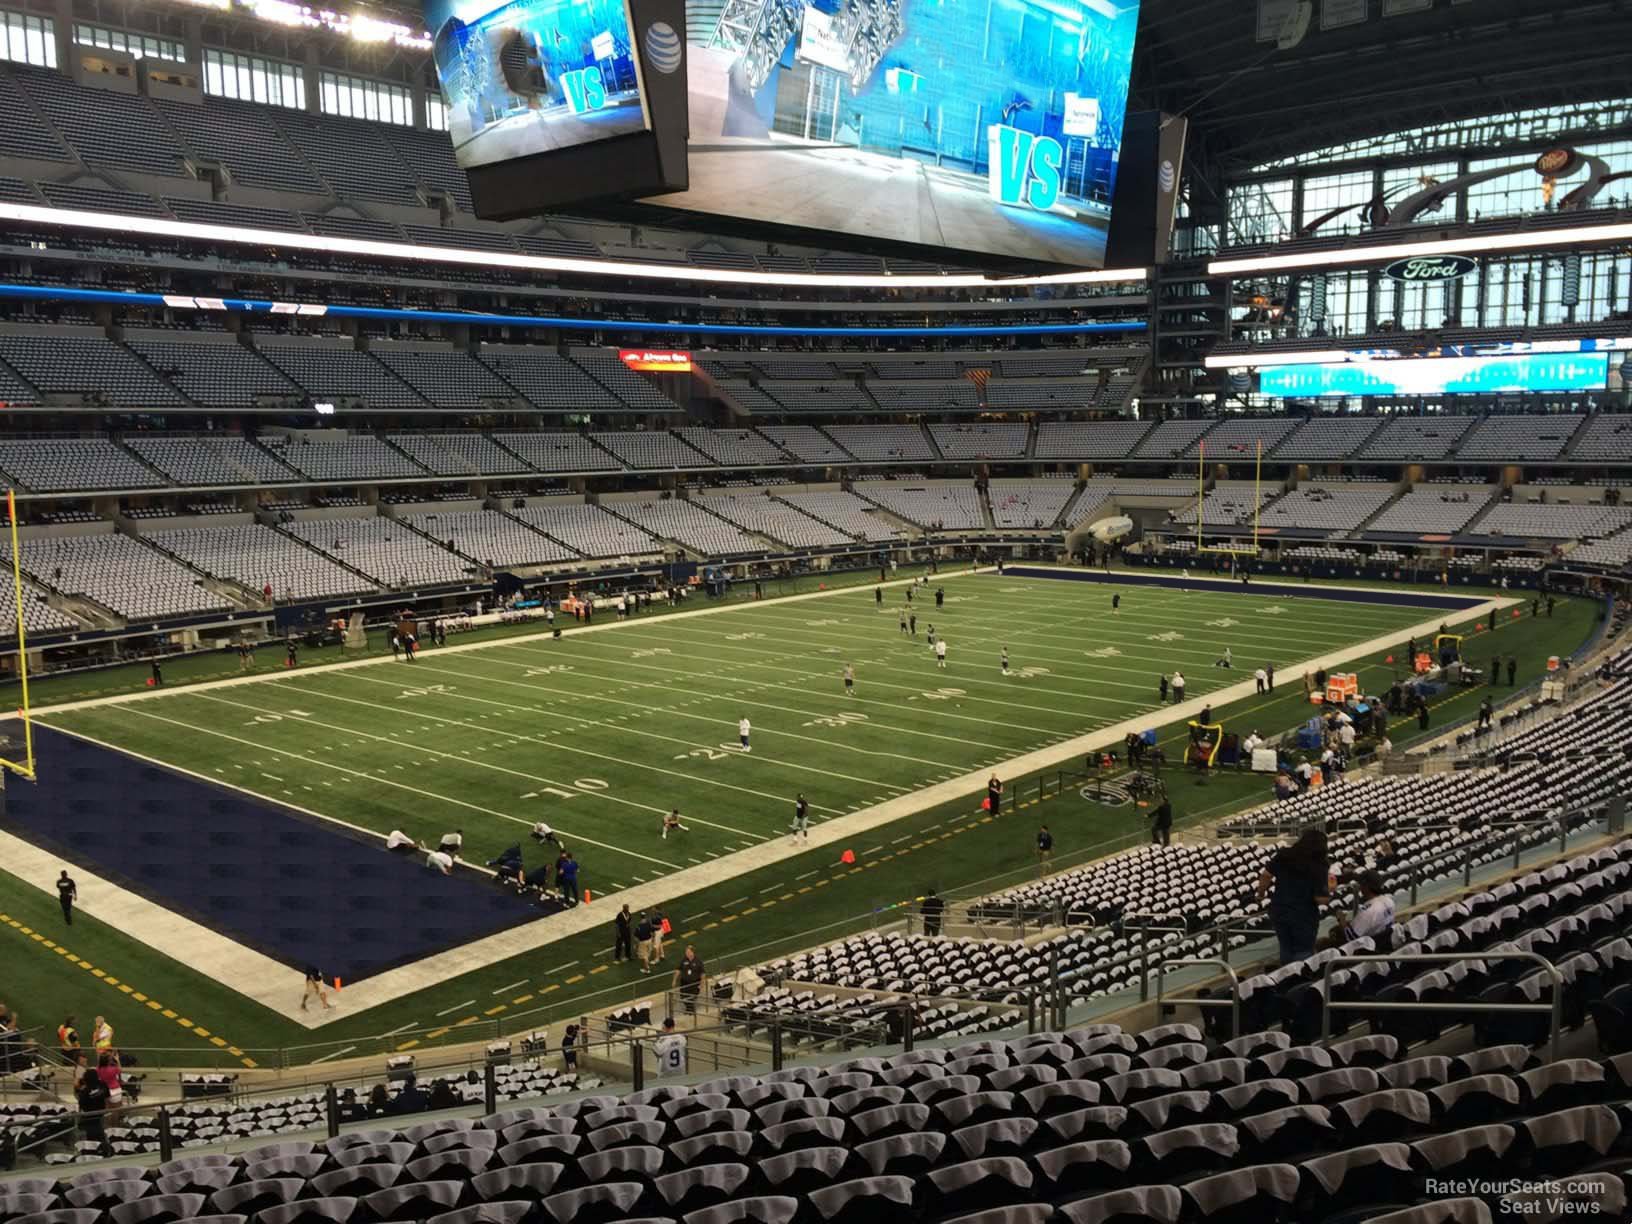 section 217, row 13 seat view  for football - at&t stadium (cowboys stadium)